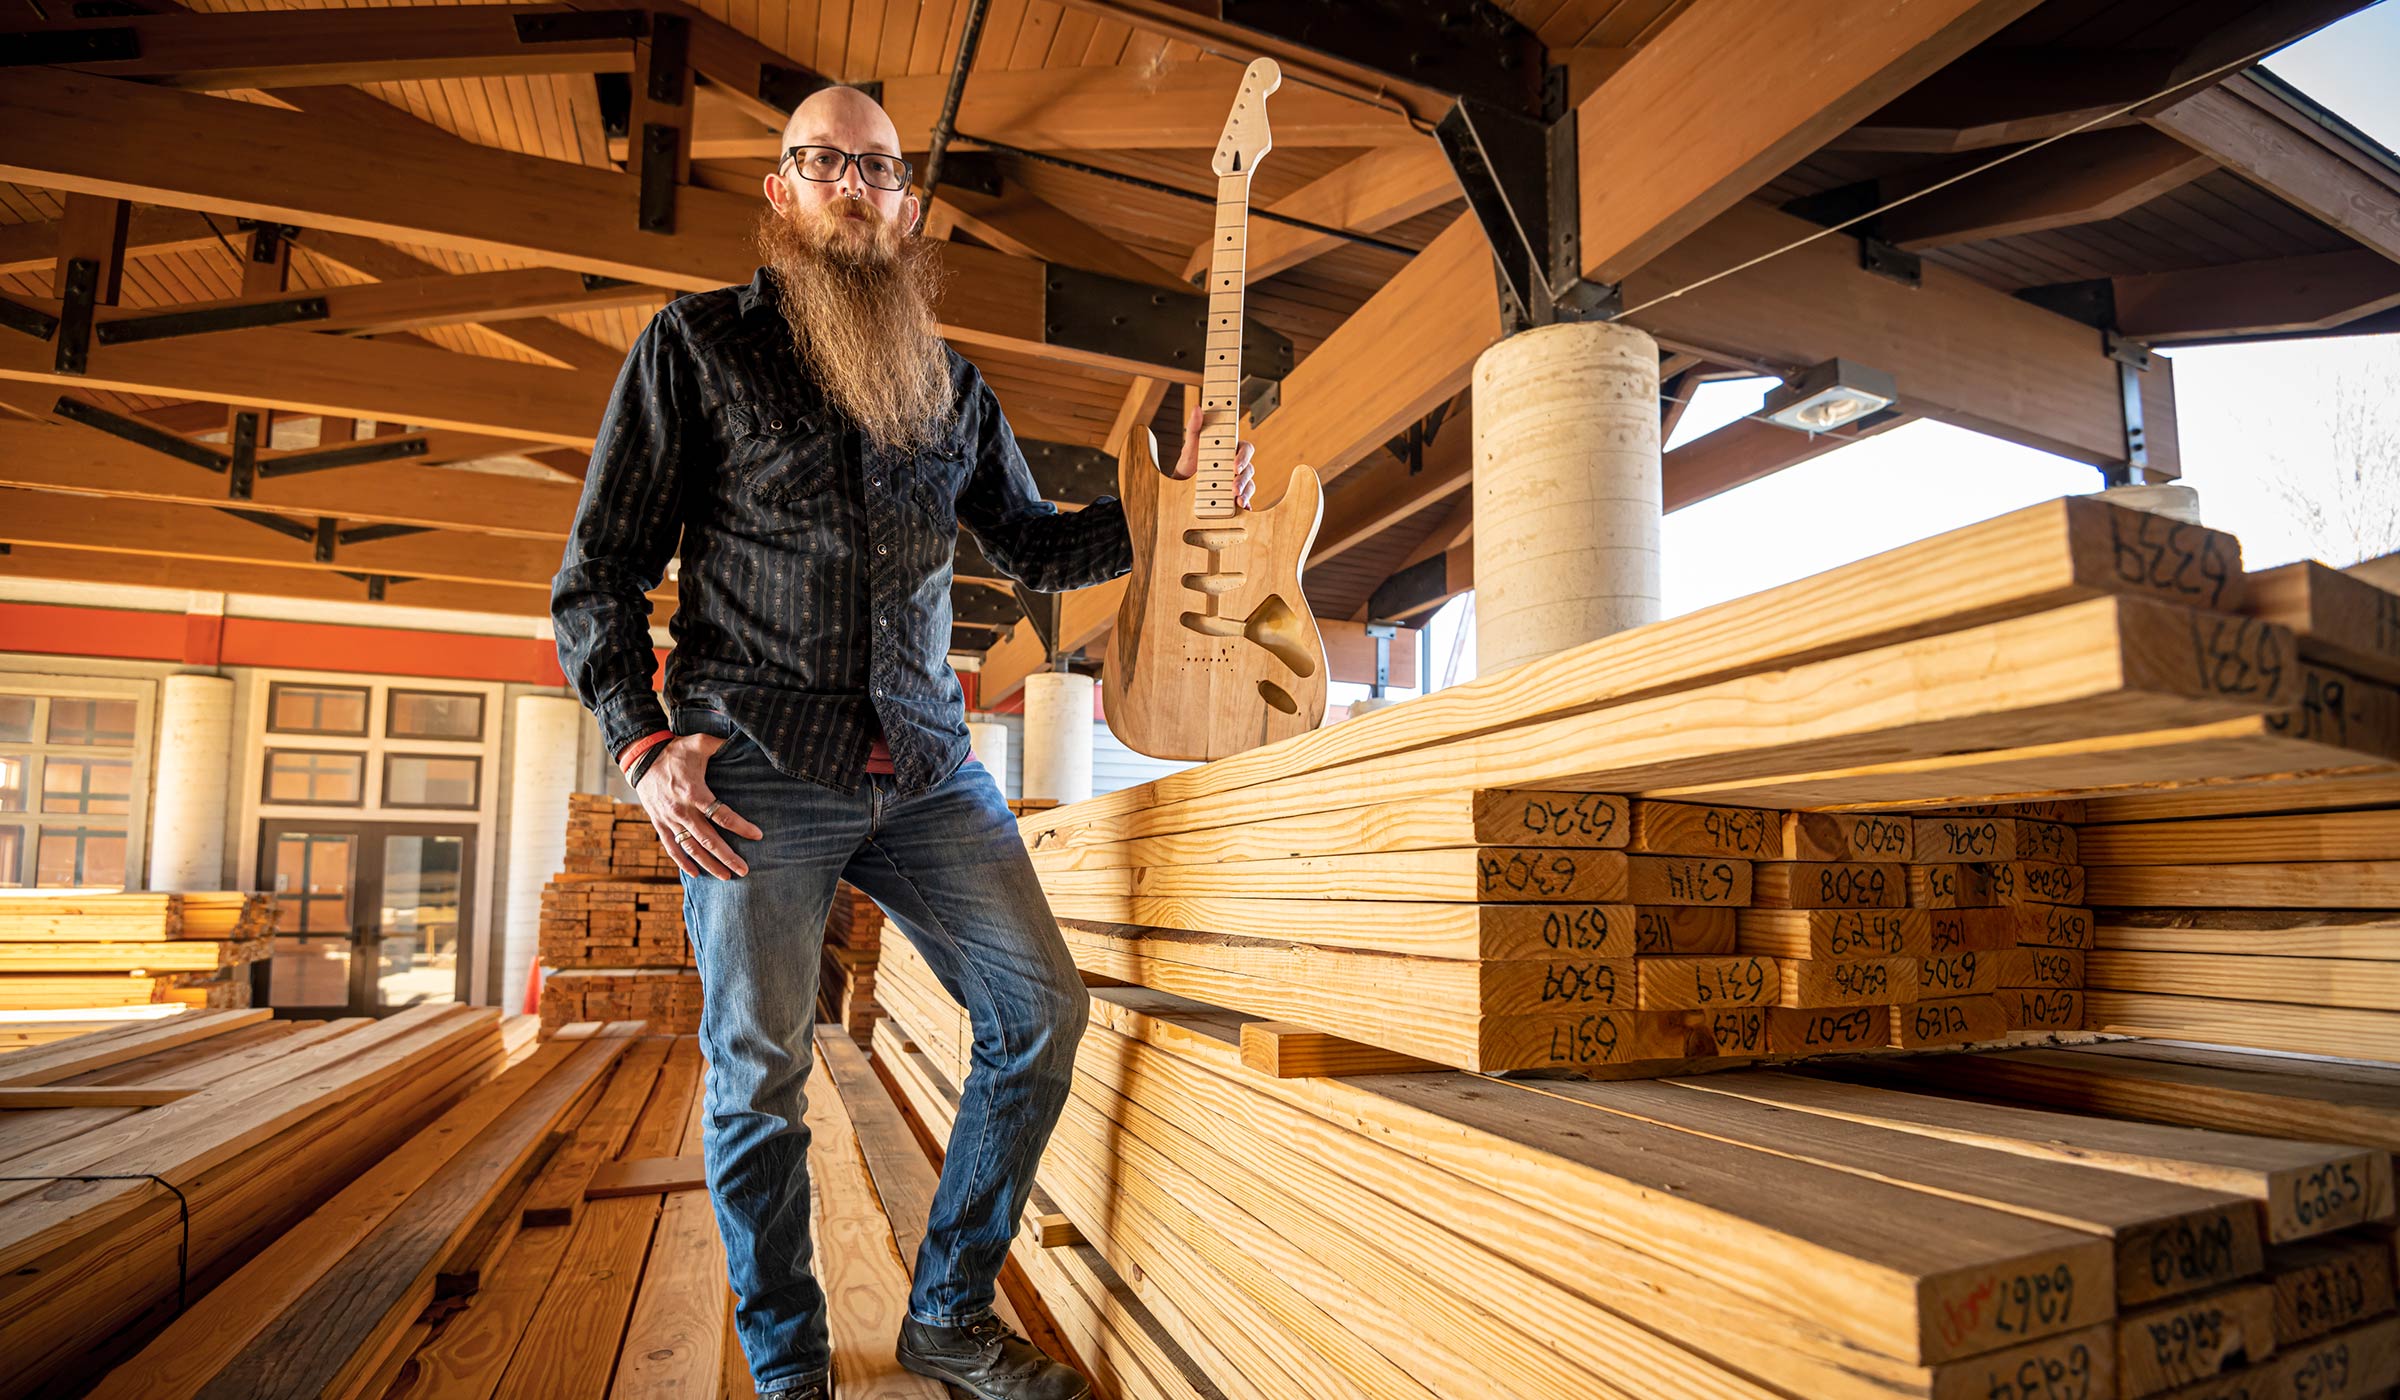 Adam Wade, pictured with a guitar and standing on a pile of lumber.